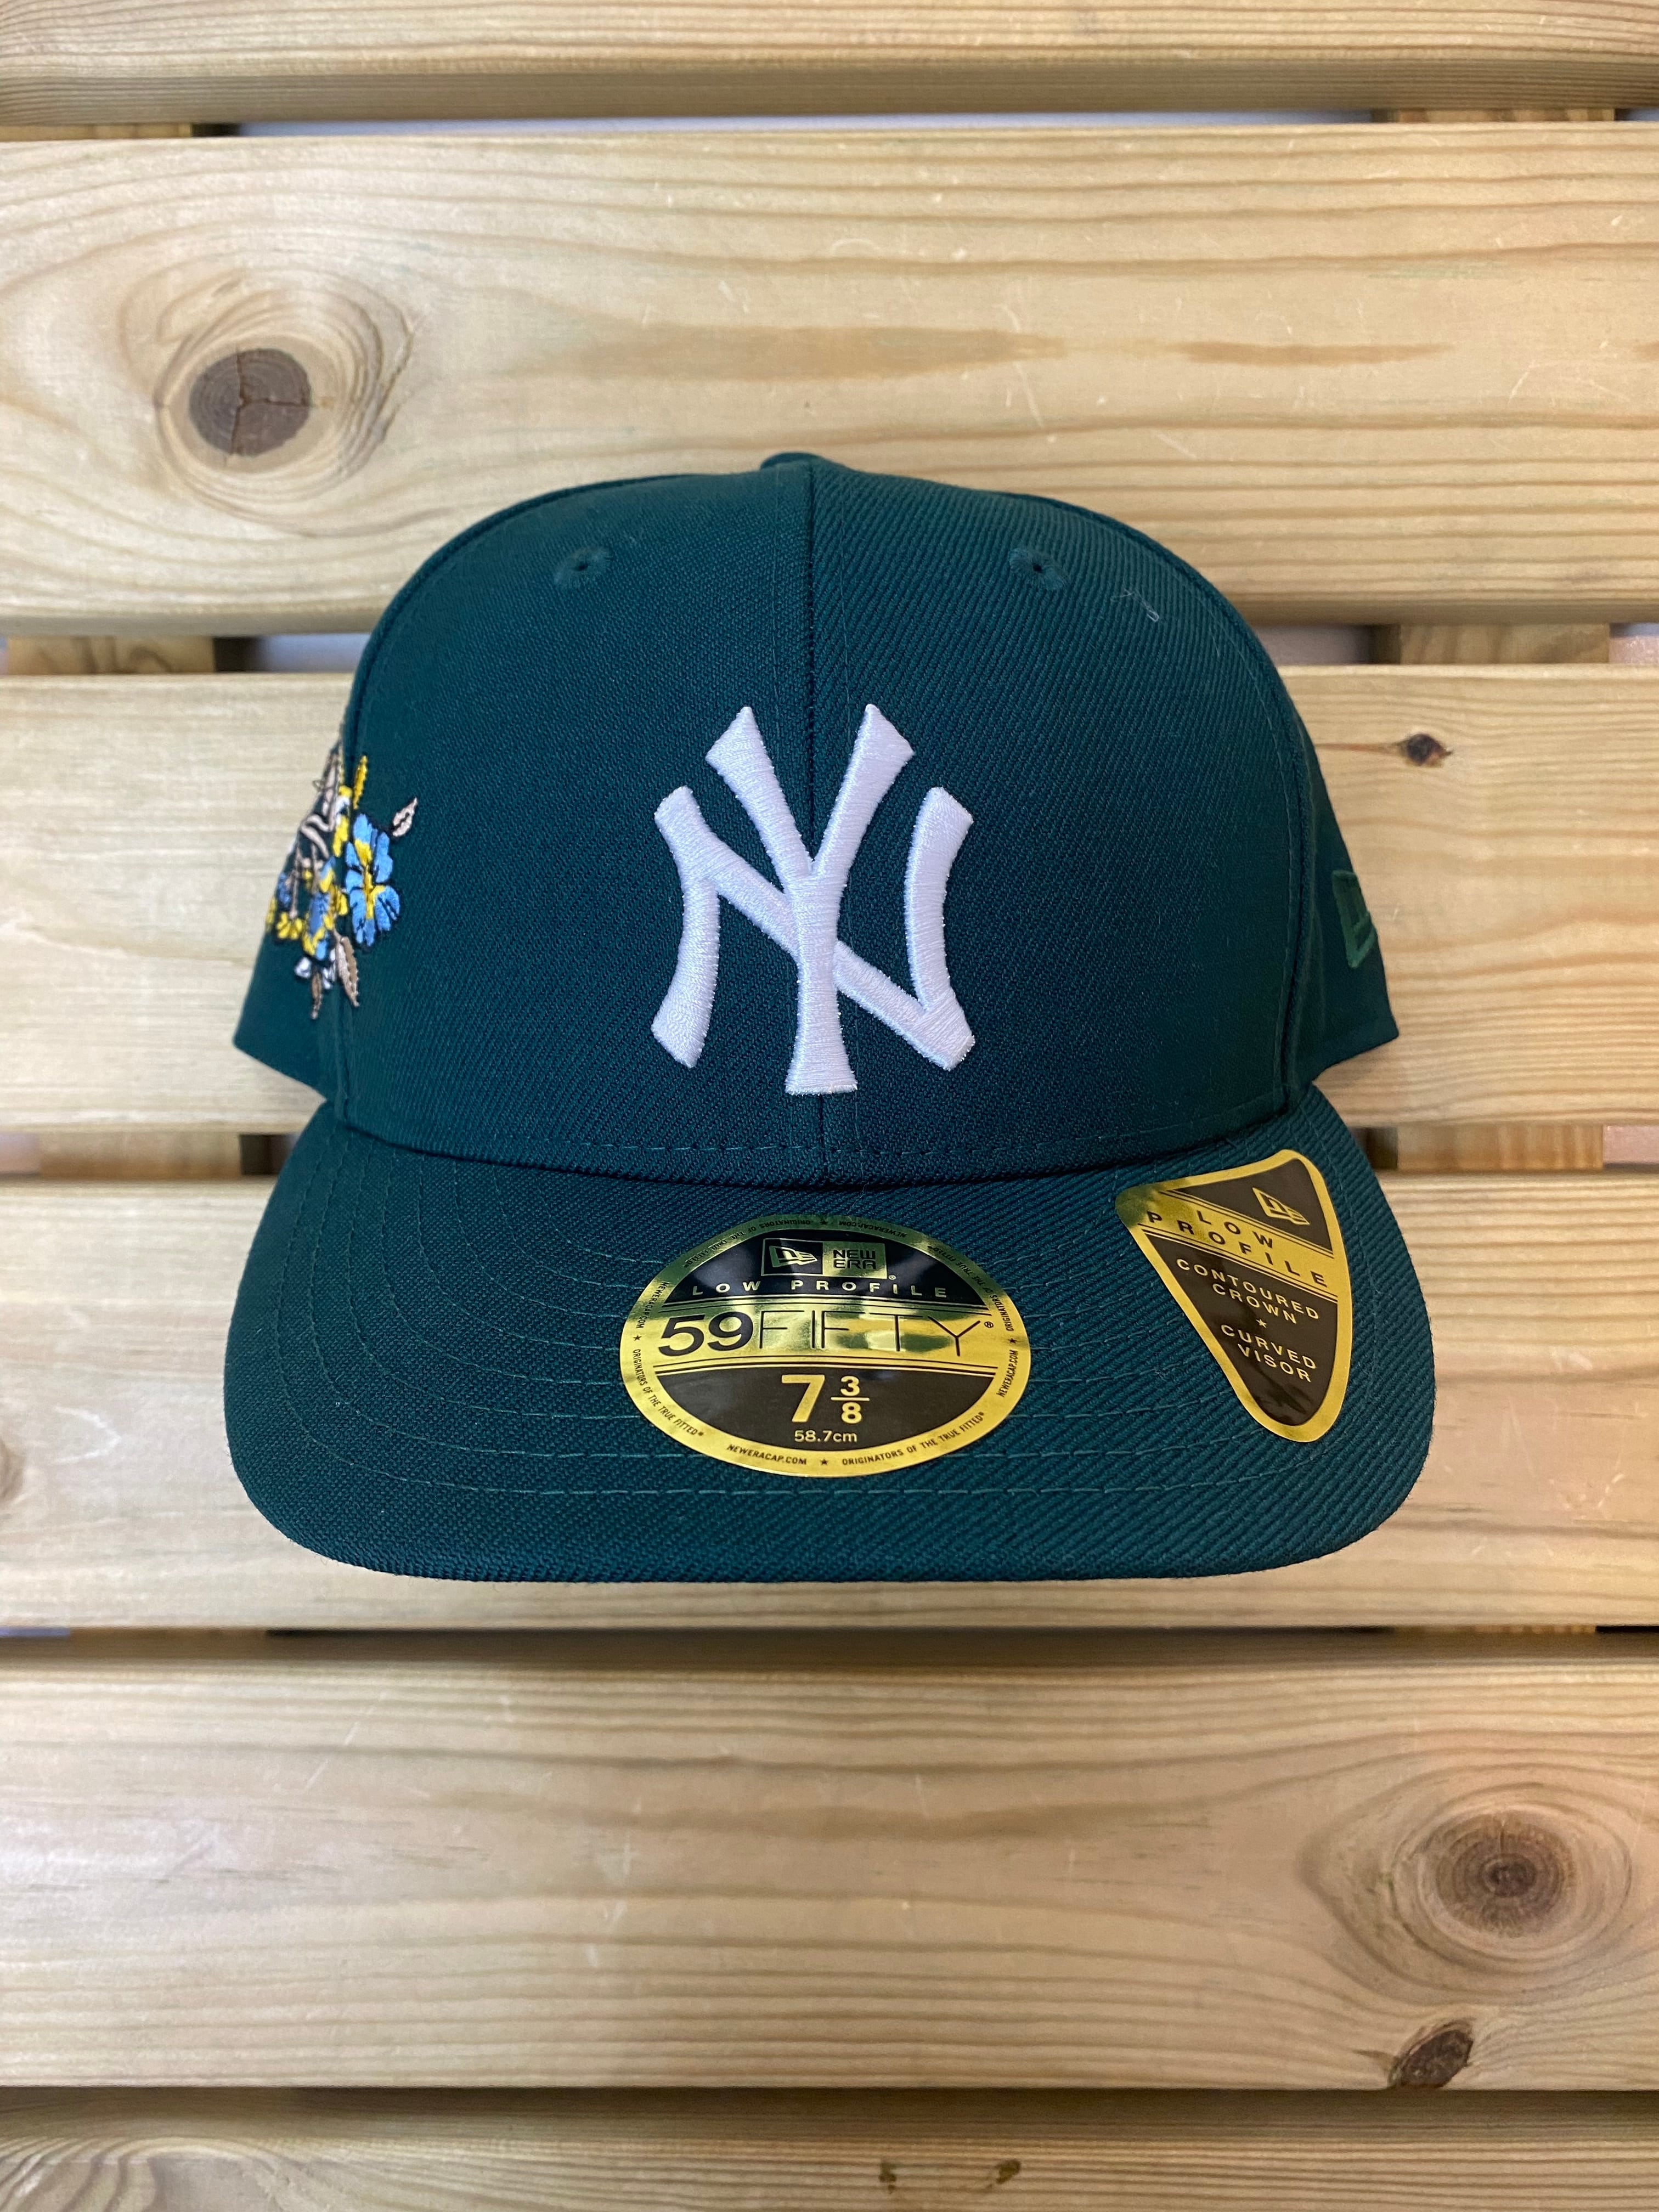 KITH × NEW ERA NEW YORK YANKEES FLORAL LOW CROWN FITTED CAP 7 3/8 ...